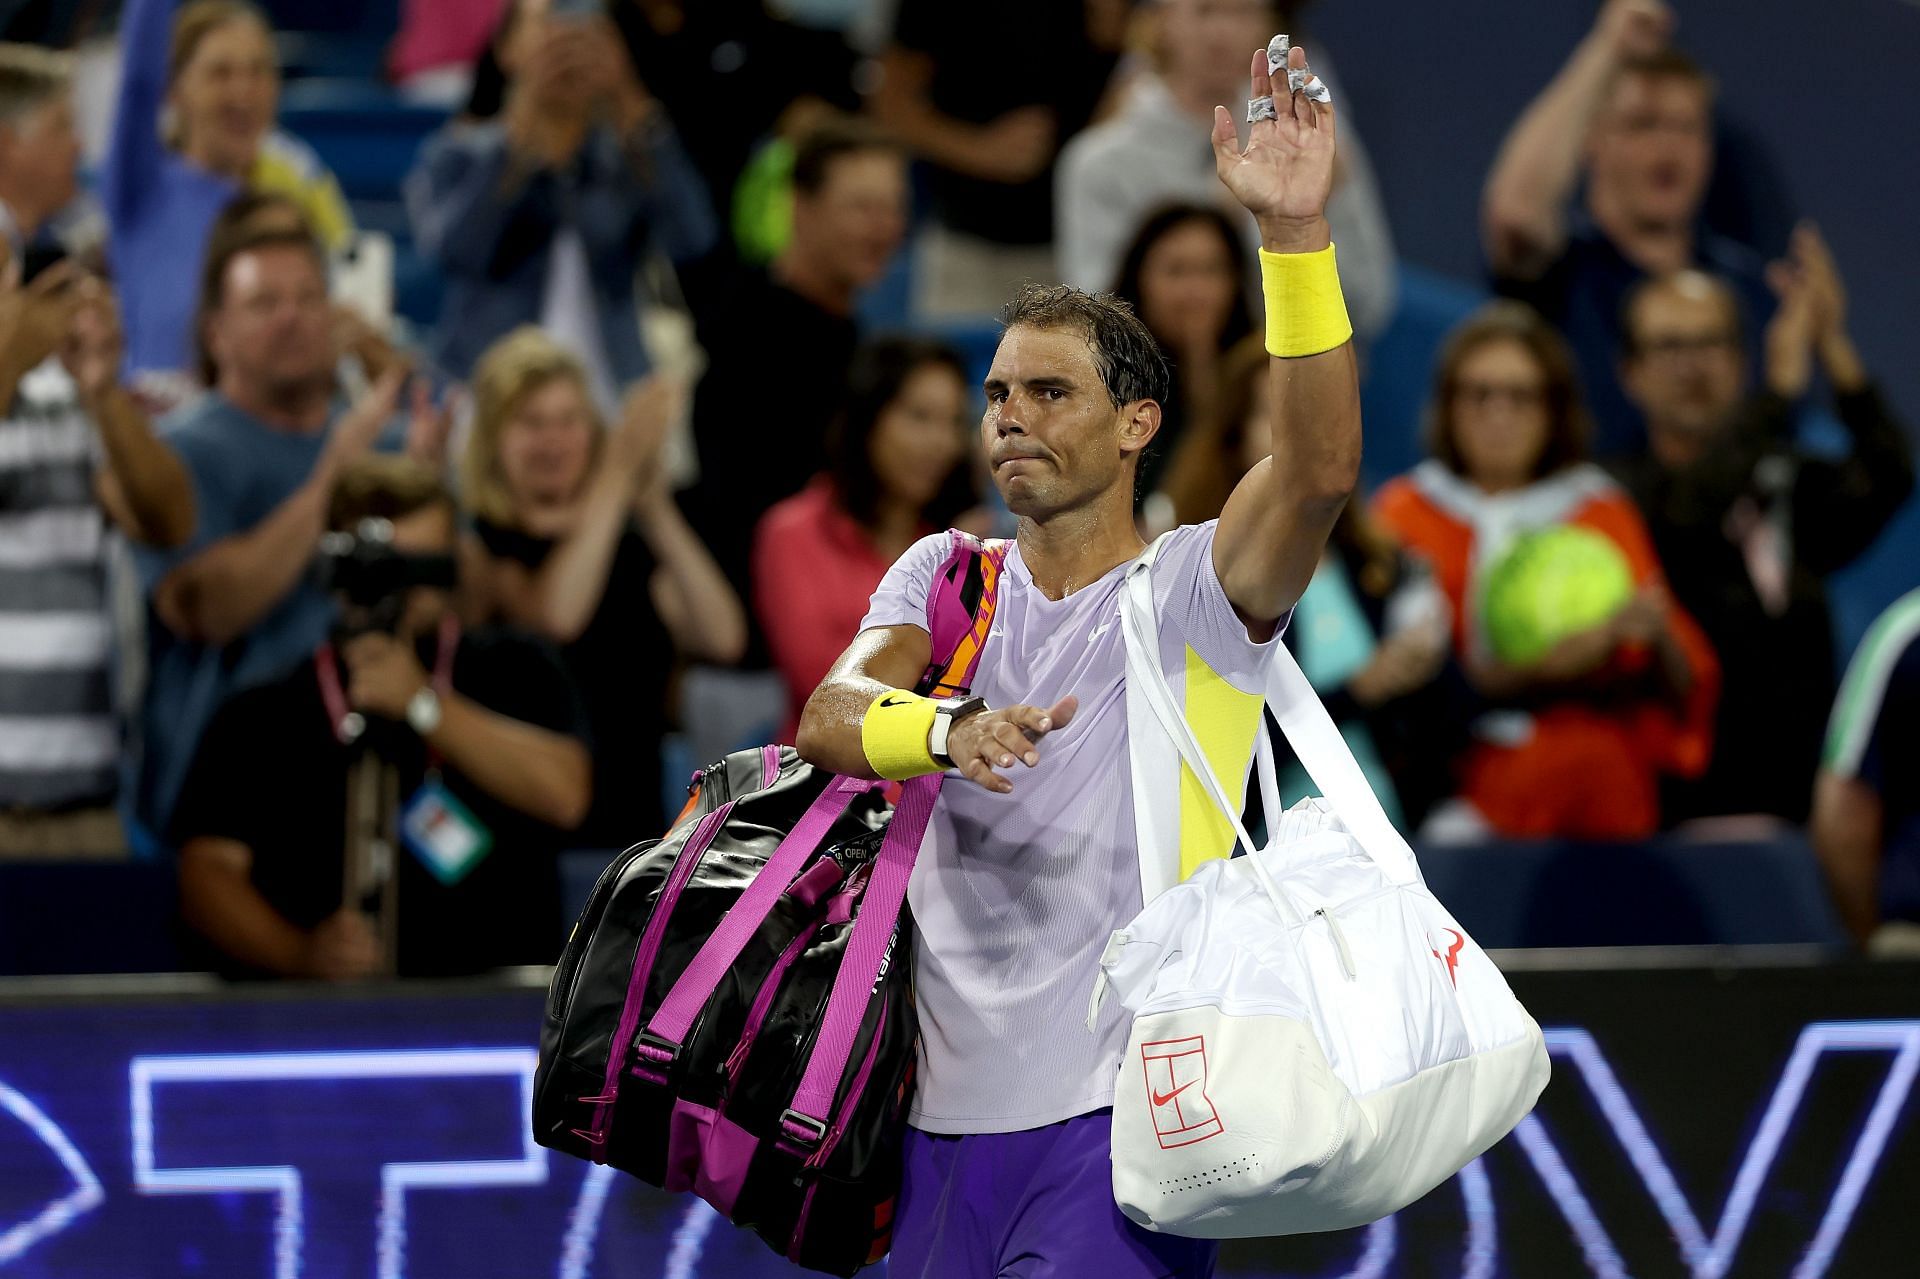 Rafael Nadal greets the crowd as he leaves the pitch after losing to Borna Coric in Cincinnati